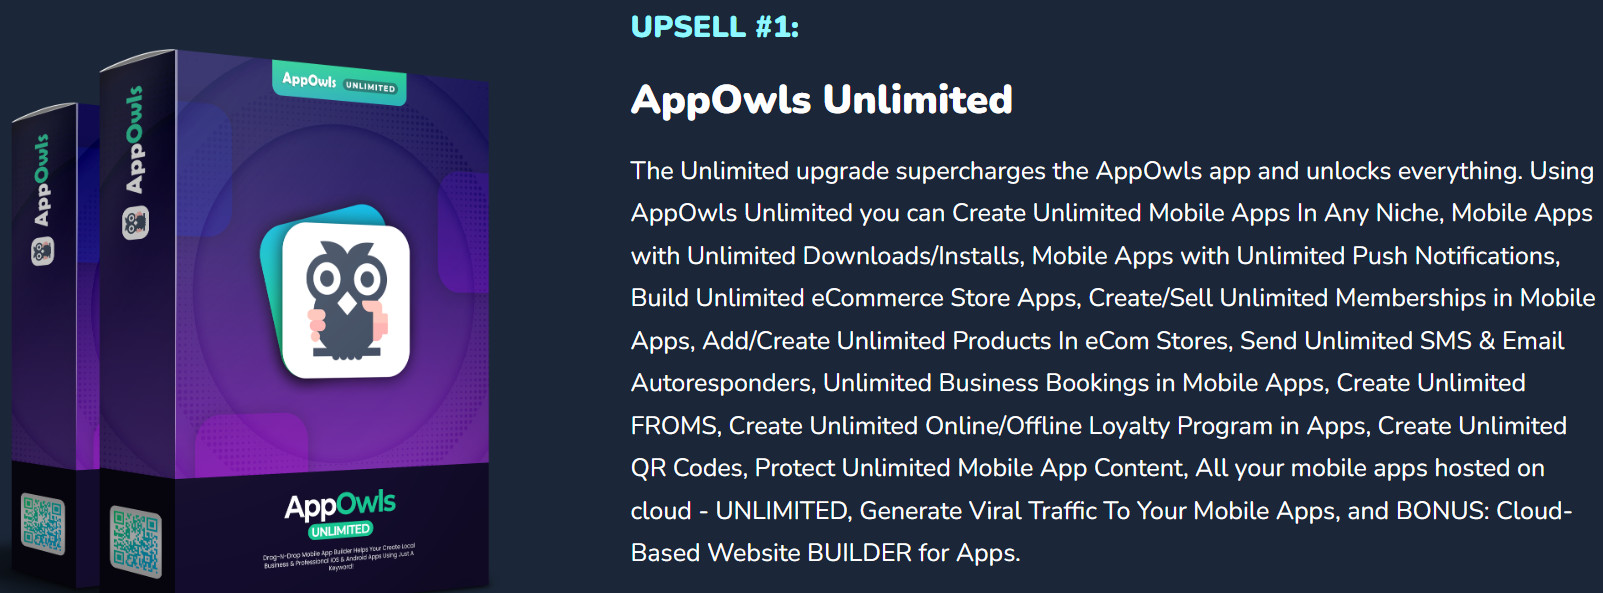 appowls unlimited upsell